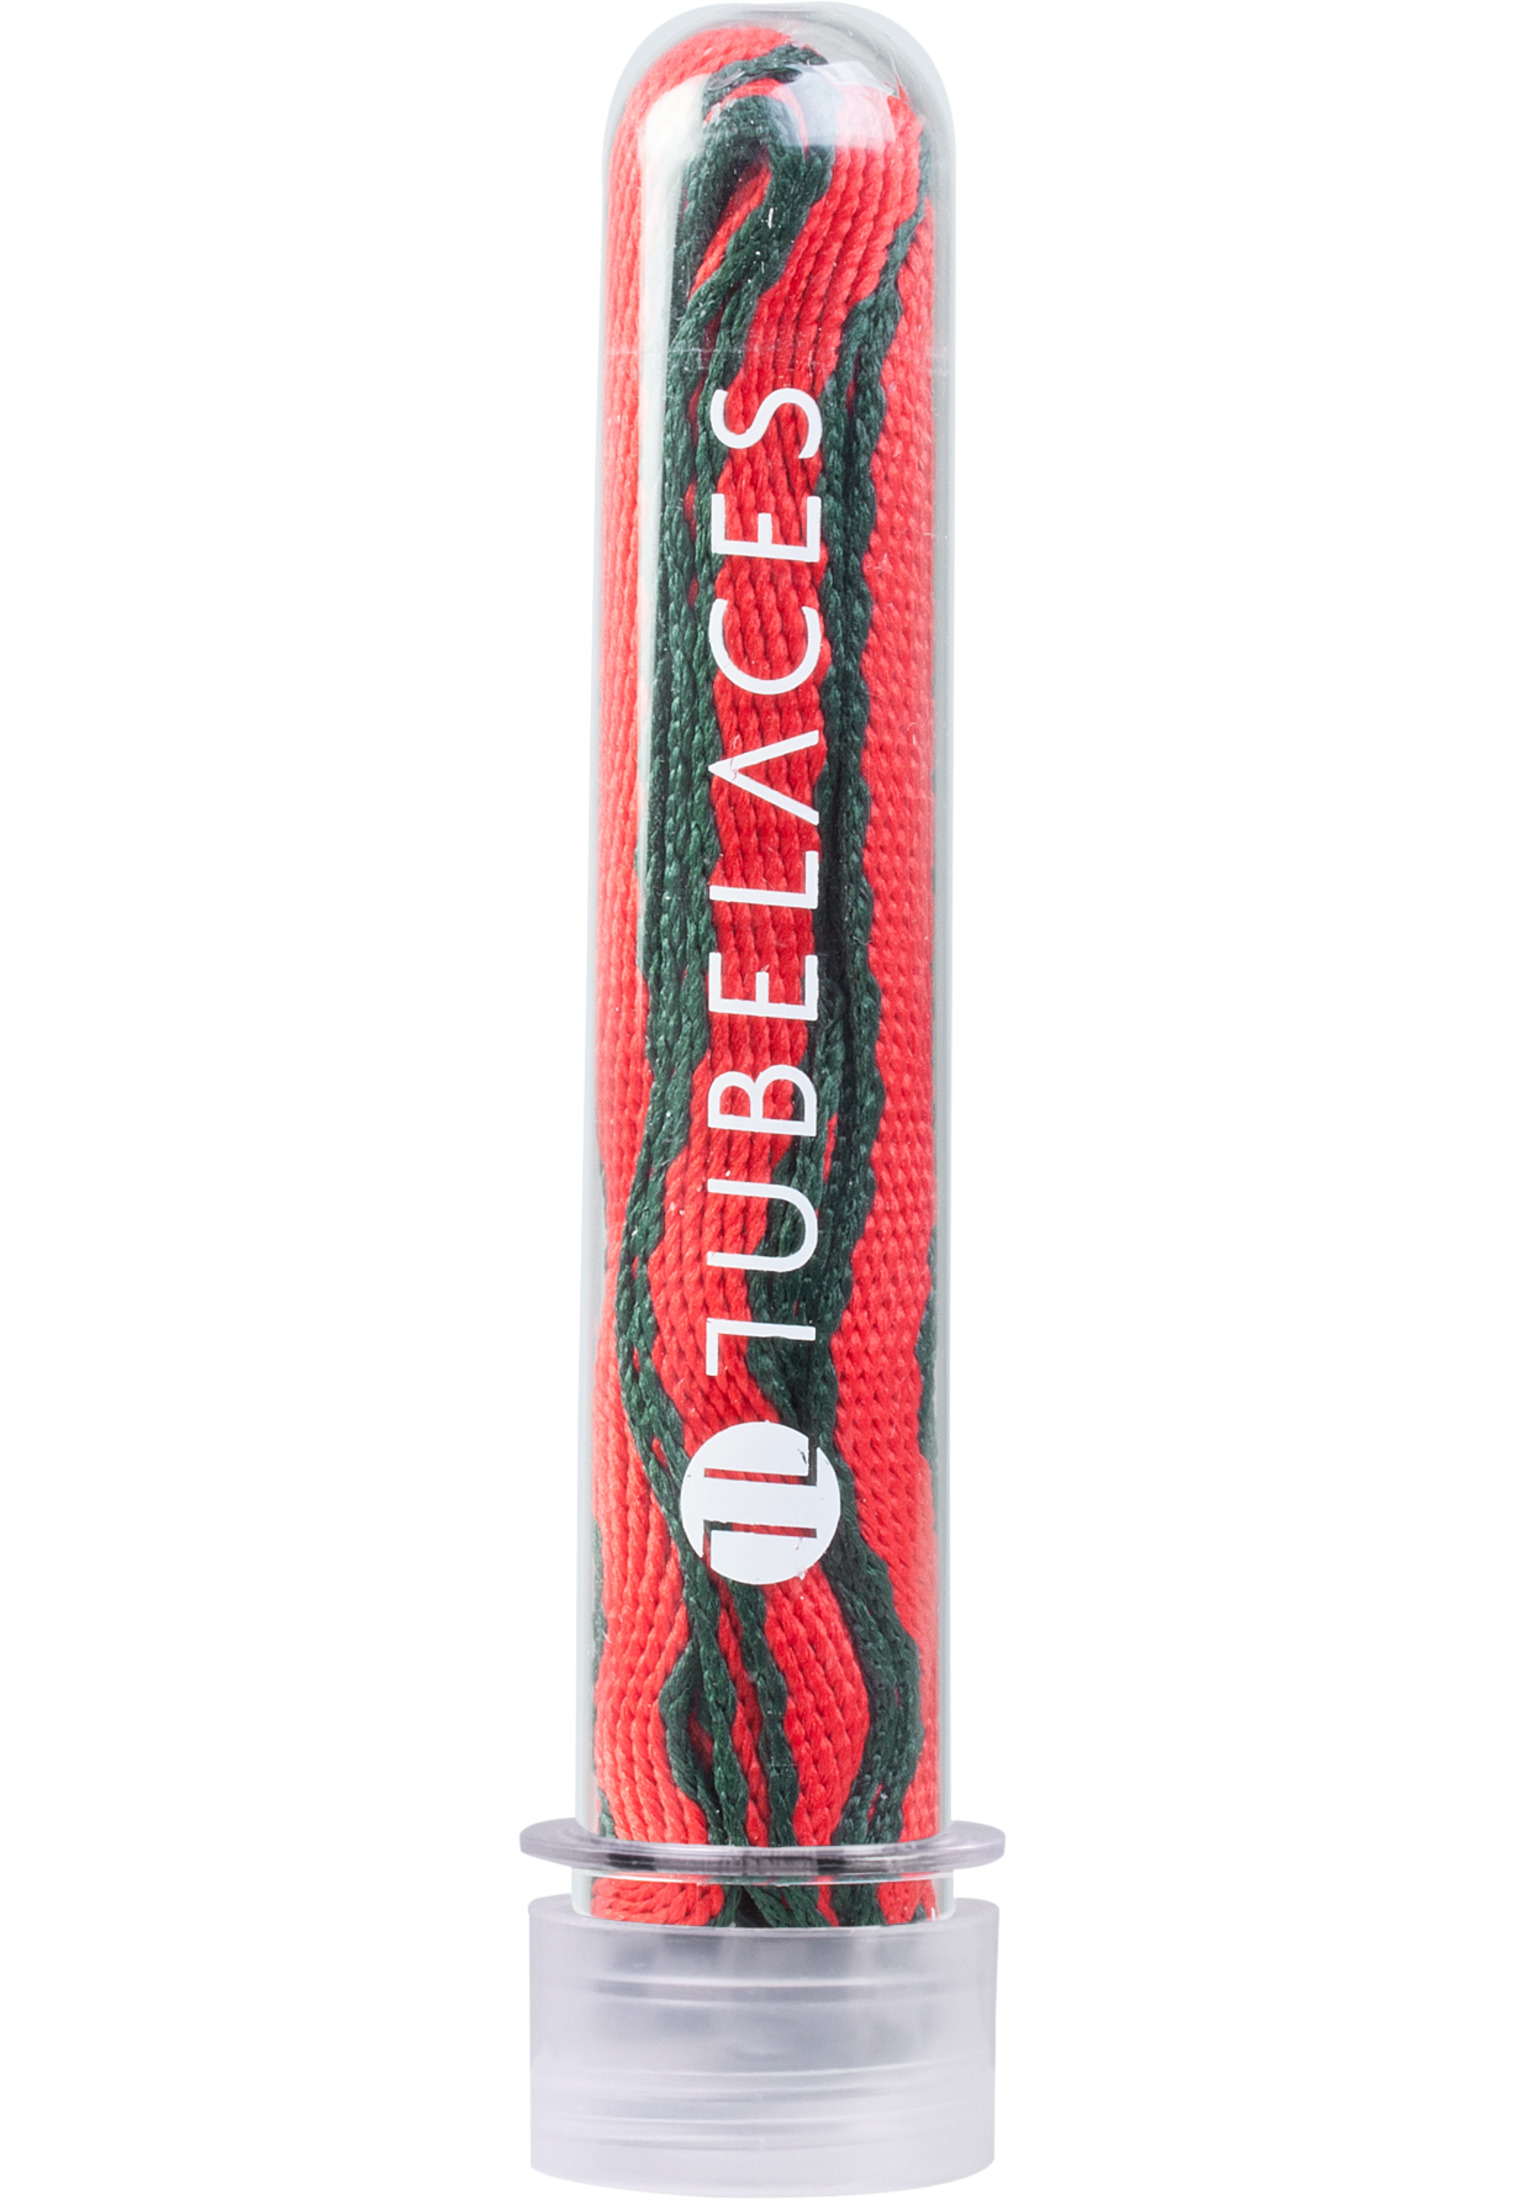 Laces Tubelaces Lux Pack (5er) in Farbe red/green